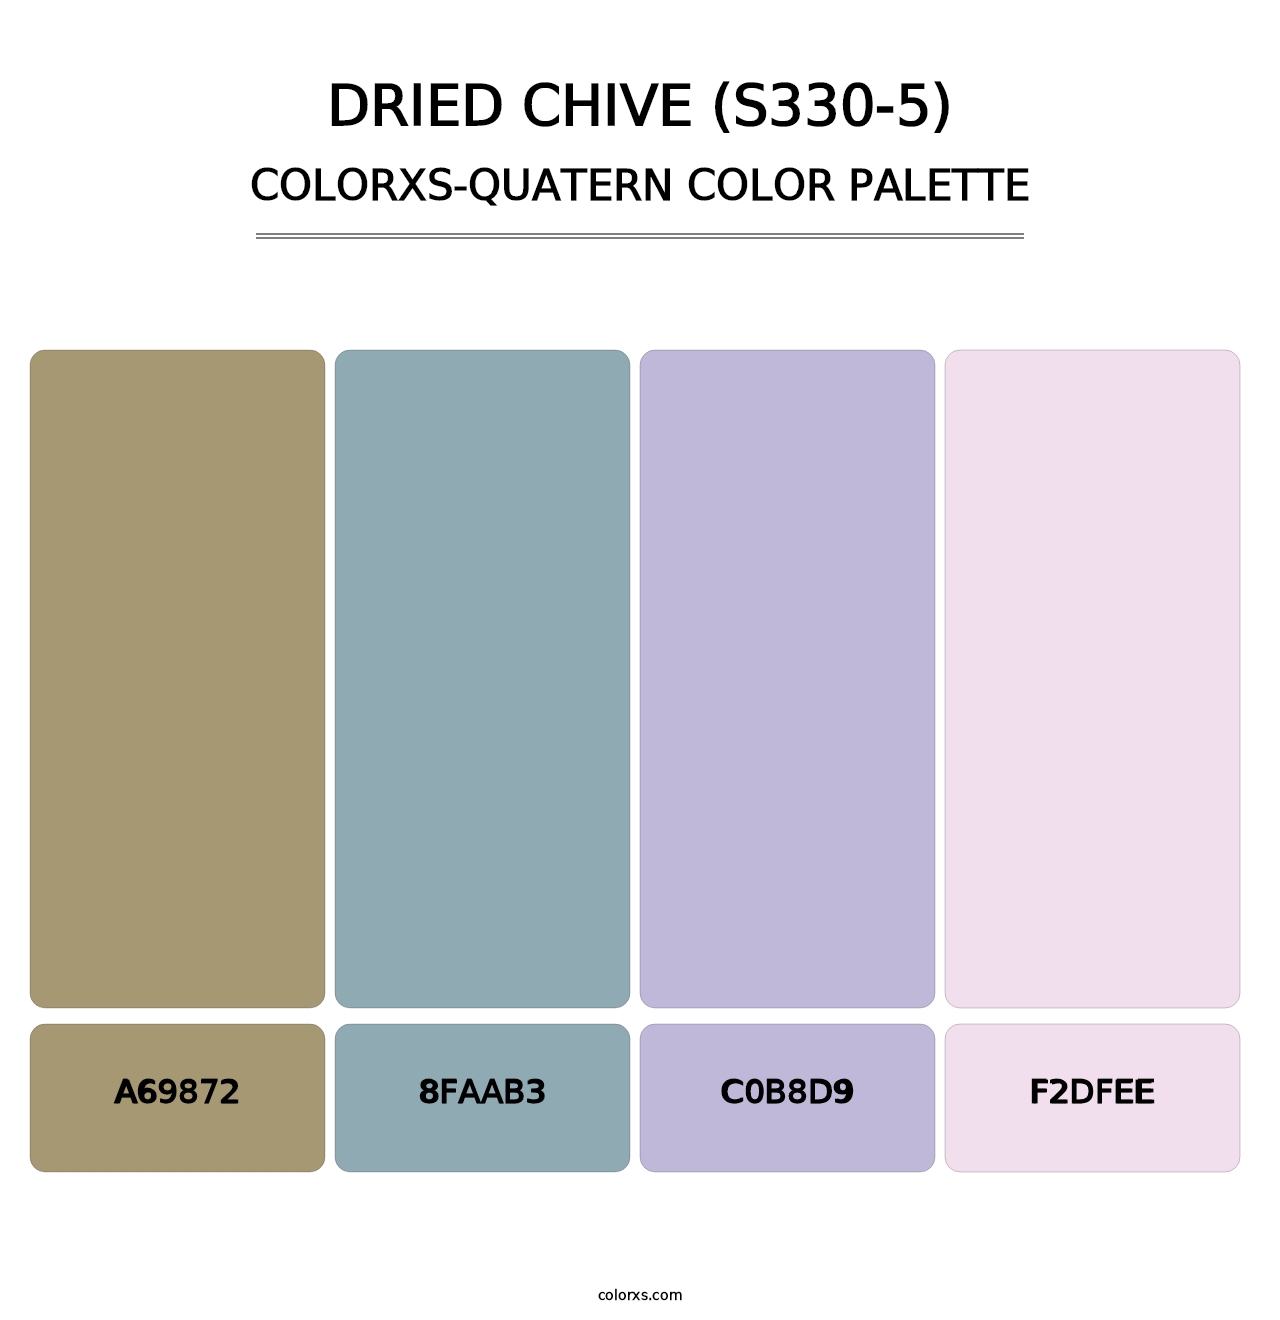 Dried Chive (S330-5) - Colorxs Quatern Palette